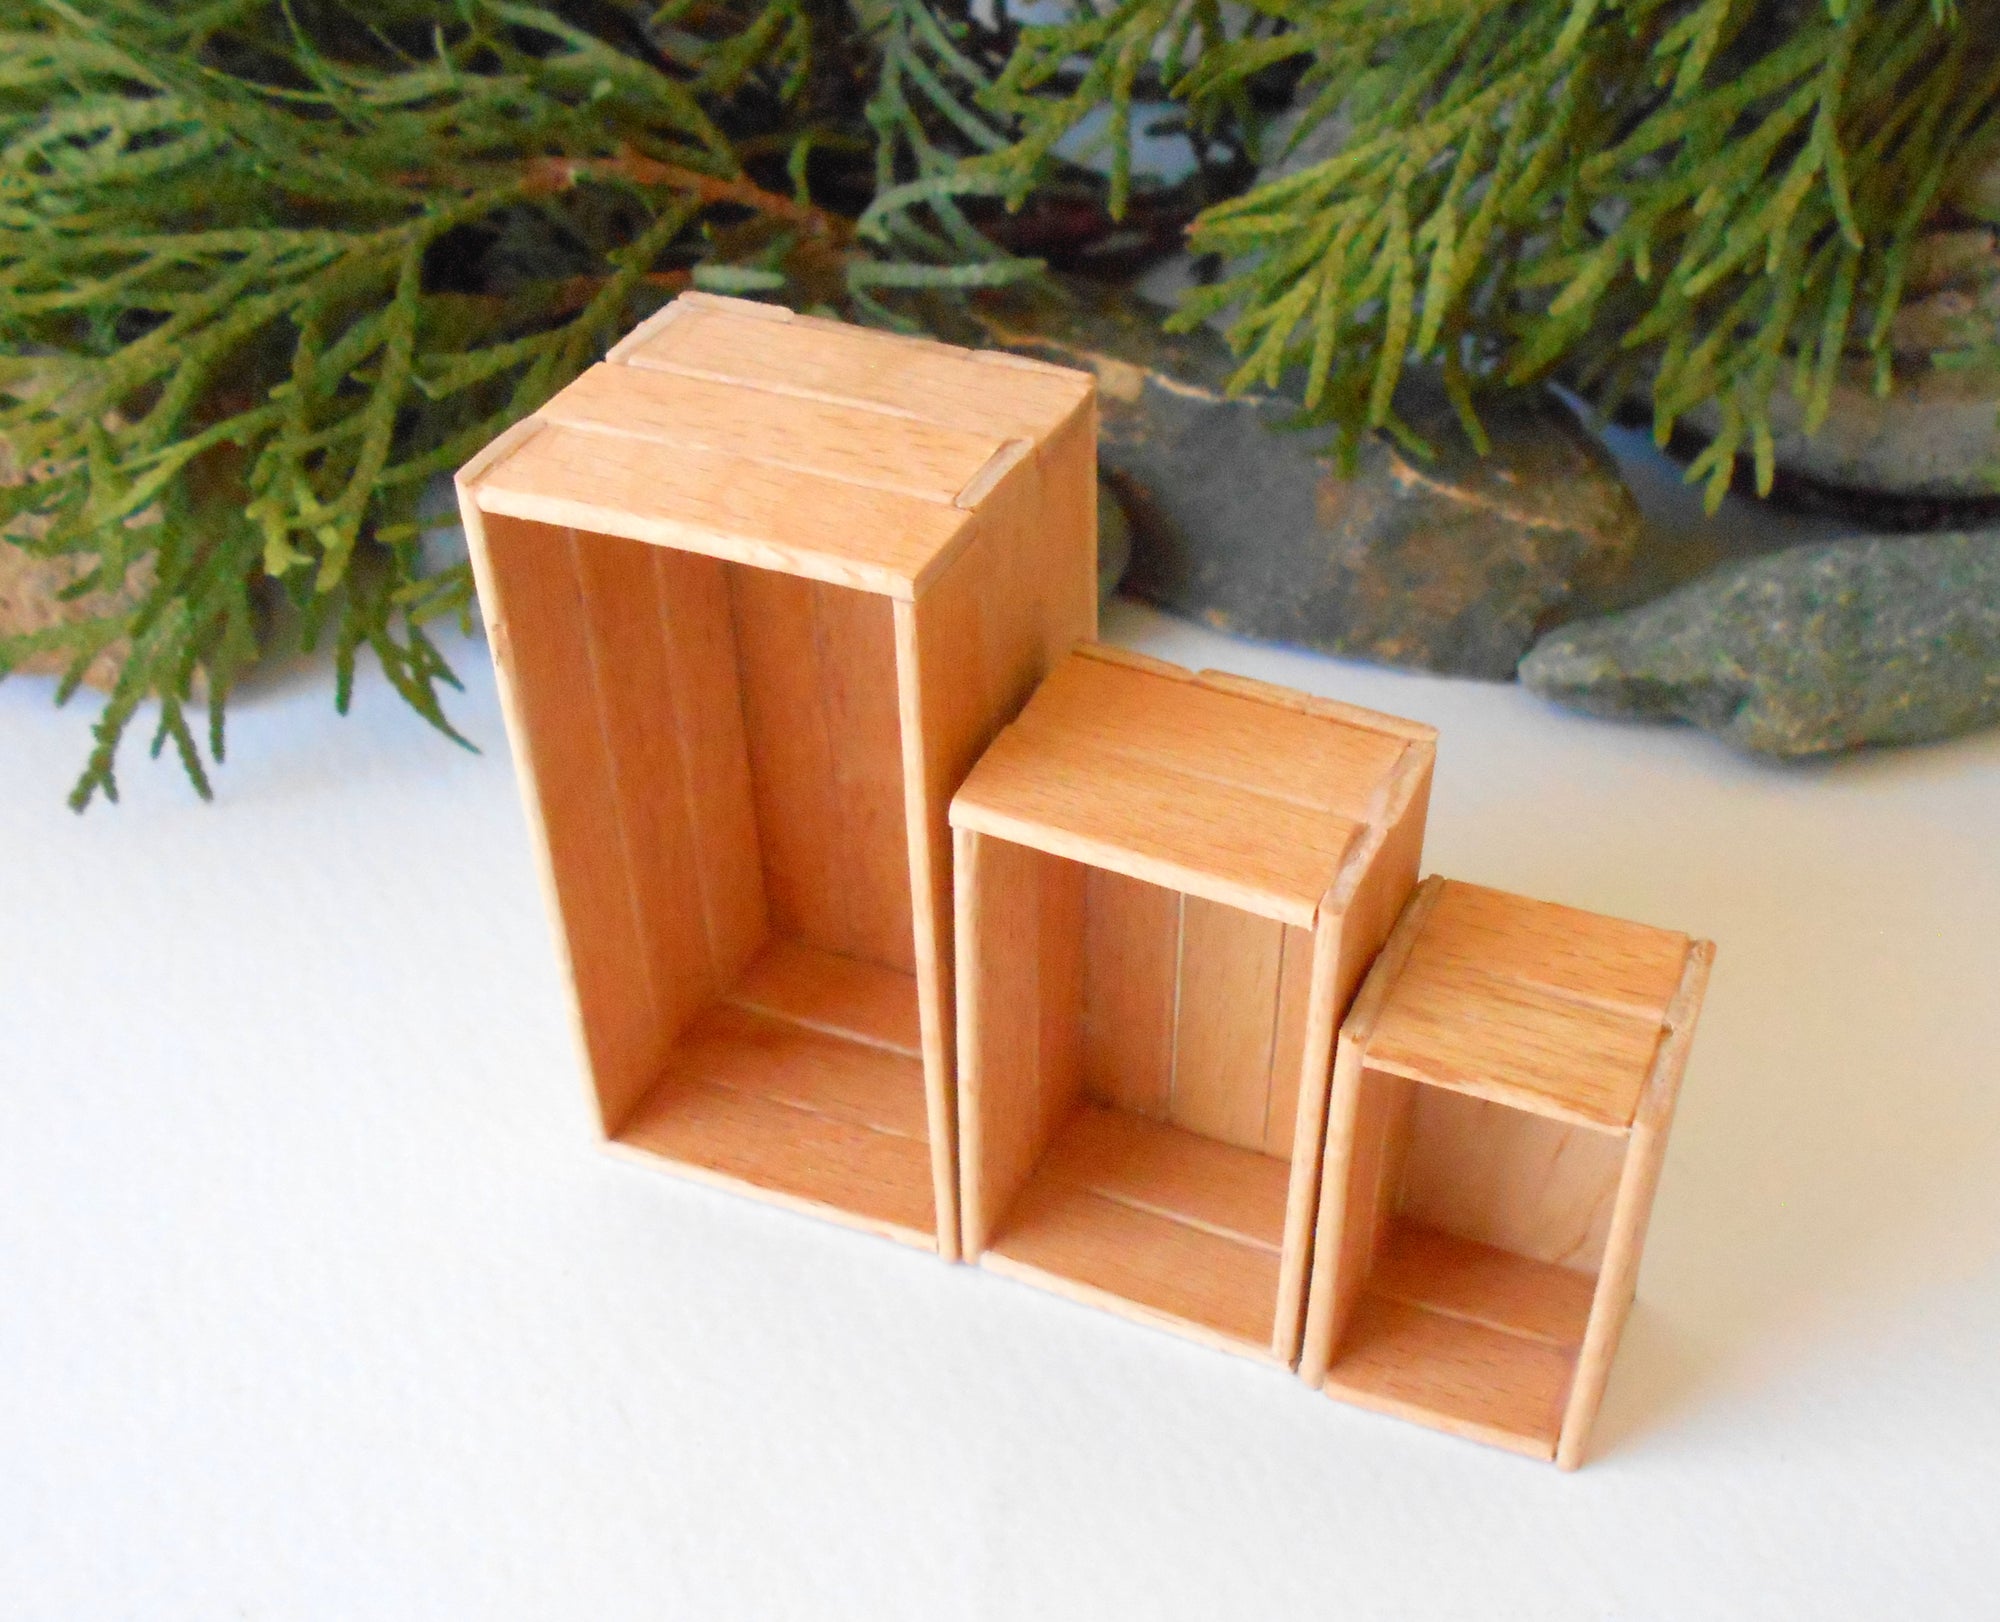 This is a set of 3 miniature boxes that are in 1/12 in scale. I craft them on order from beech popsicle sticks that I saved from being thrown away when I worked in an Ice cream factory in the Netherlands in 2023. The set consists of 1 big rectangular box, 1&nbsp; medium rectangular box, and one small rectangular box.